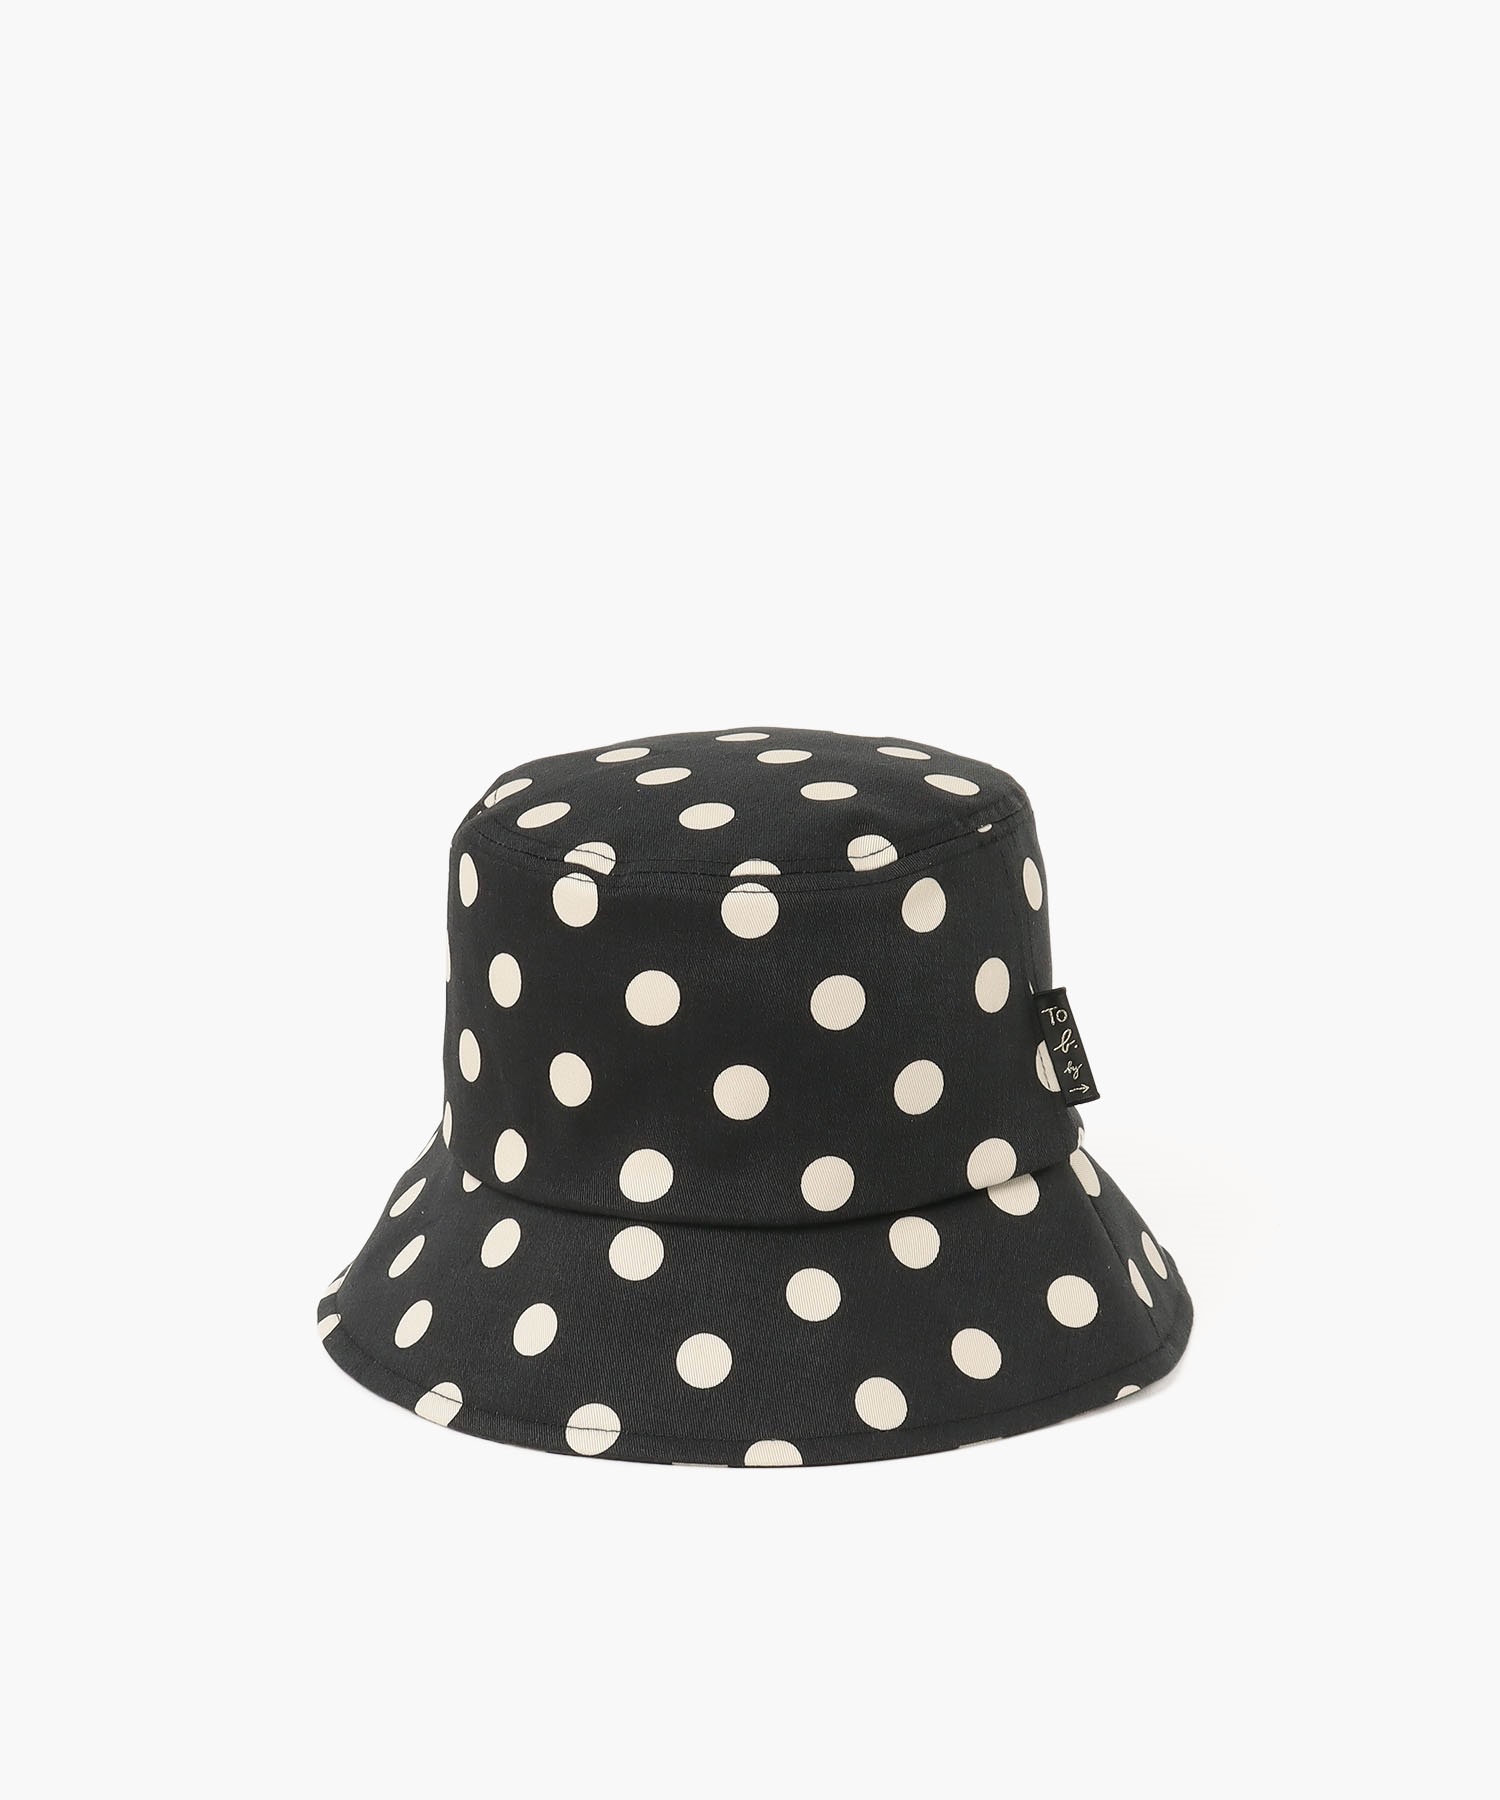 WU45 CHAPEAUX クラシックバケットハット ｜To b. by agnès b